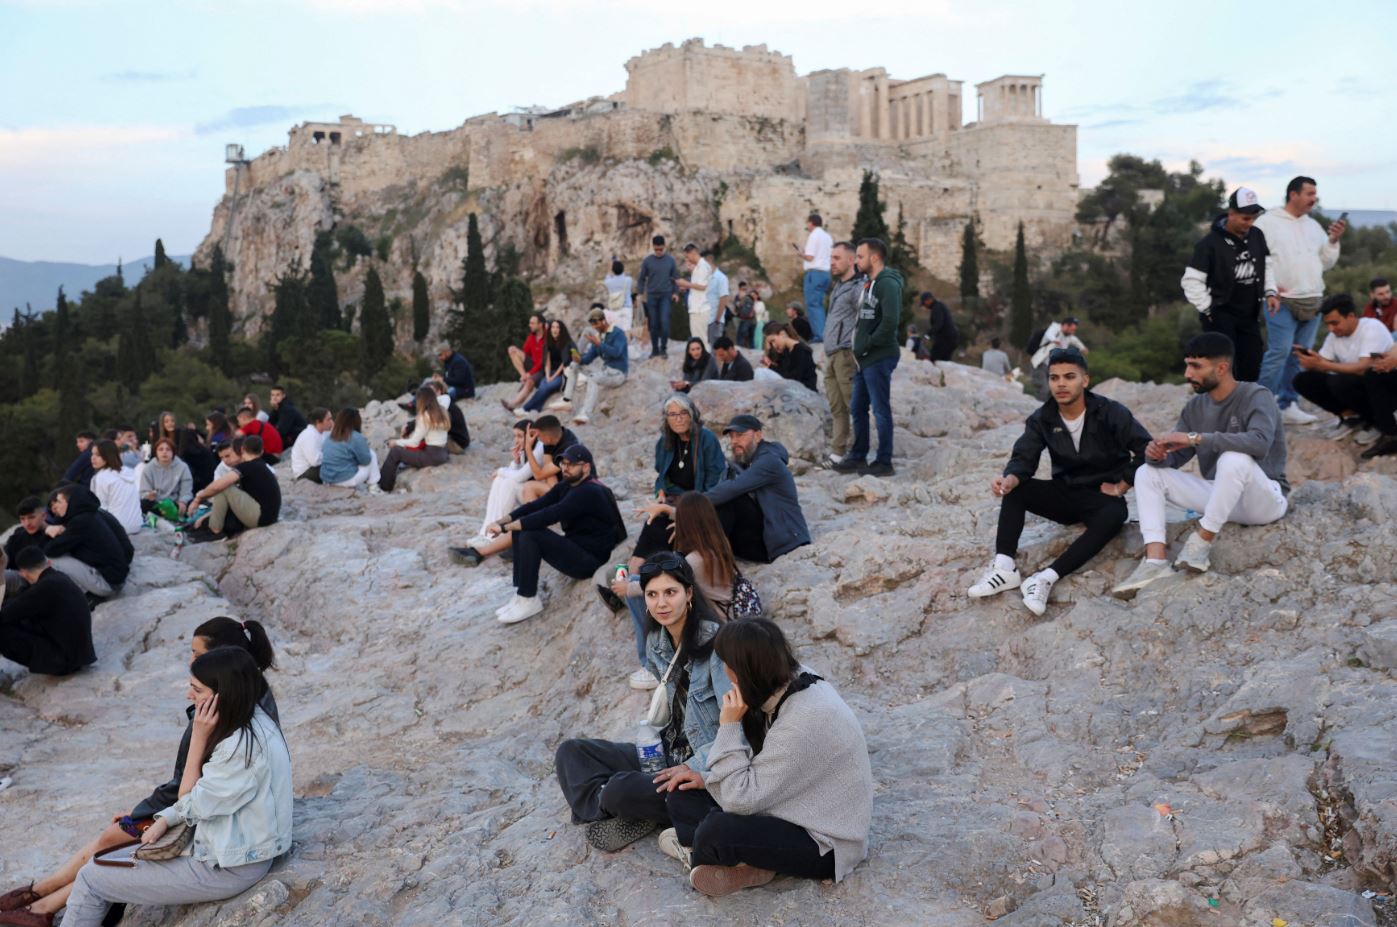 People visit the Areios Pagos hill, with the Acropolis’ Propylaea seen in the background, in Athens, May 13. [Louiza Vradi/Reuters]